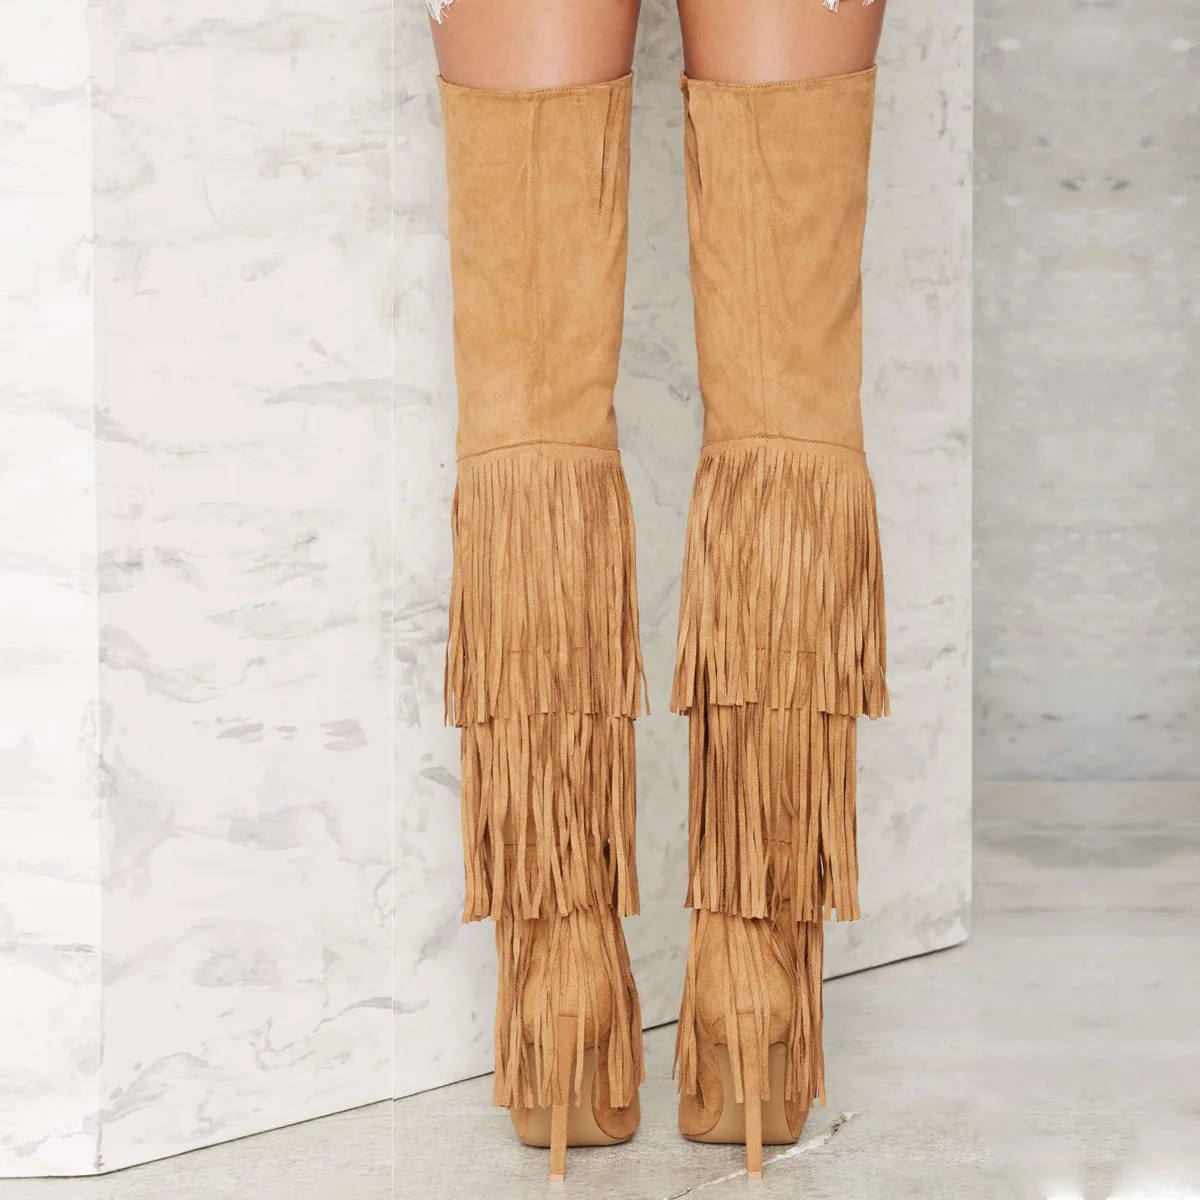 

Women's Over-the-knee Boots Brown Knee Length Tassel Super High Heeled Thin Heels Thigh Boot Shoes Woman Femmes Chaussures Botas